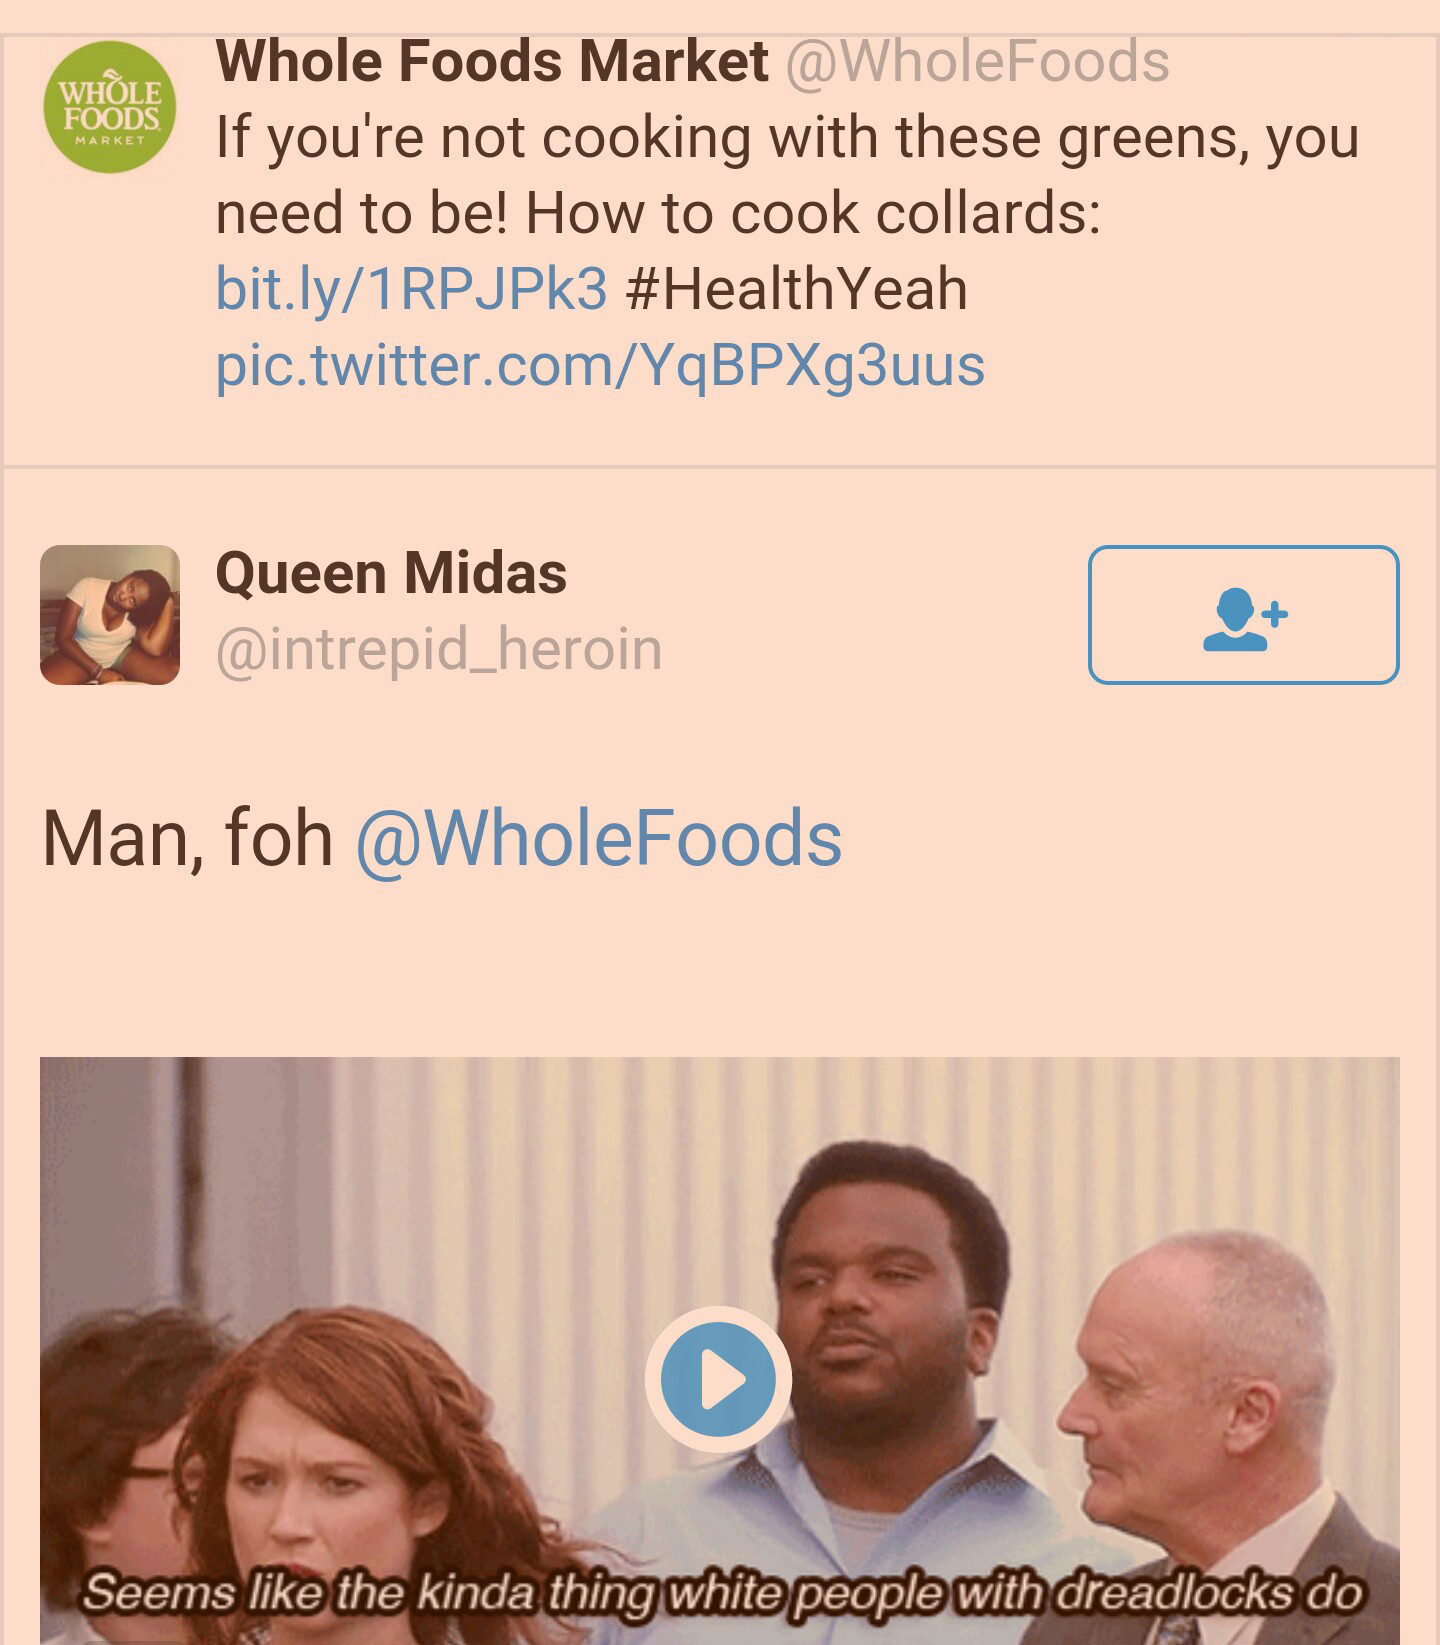 tweet - Meme - Whole Foods Market If you're not cooking with these greens, you need to be! How to cook collards bit.ly1RPJPk3 Yeah pic.twitter.comYqBPXg3uus Queen Midas Man, foh Foods Seems the kinda thing white people with dreadlocks do